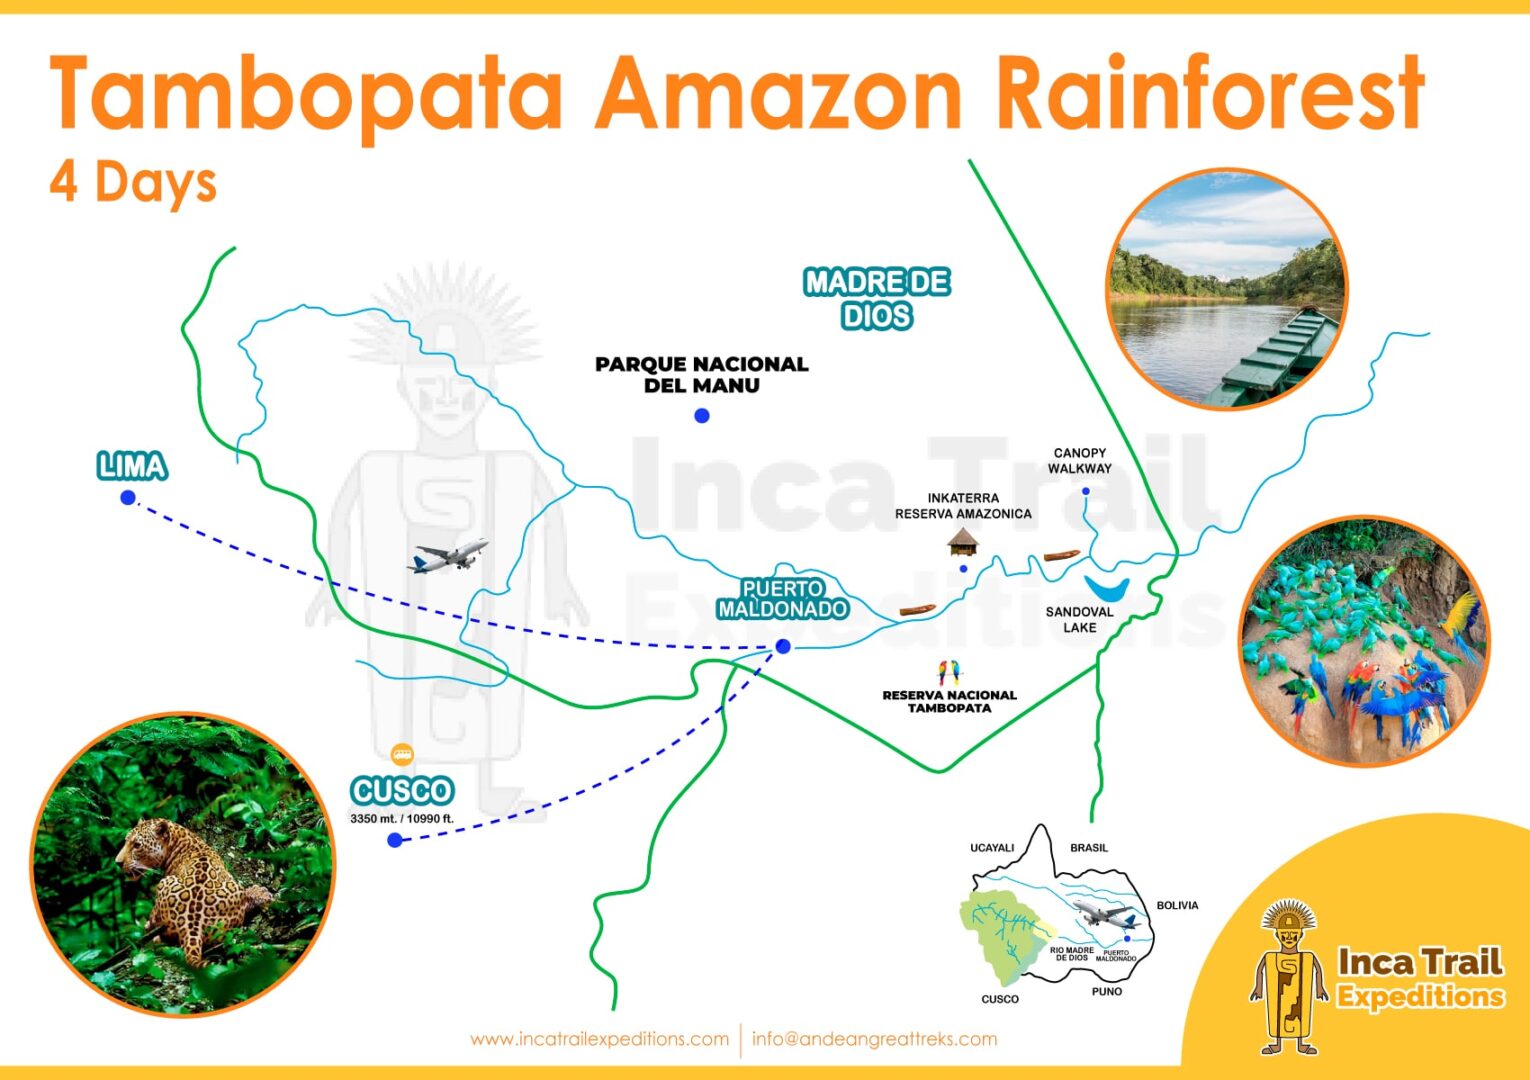 TAMBOPATA-AMAZON-RAINFOREST-4-DAYS-BY-INCA-TRAIL-EXPEDITIONS